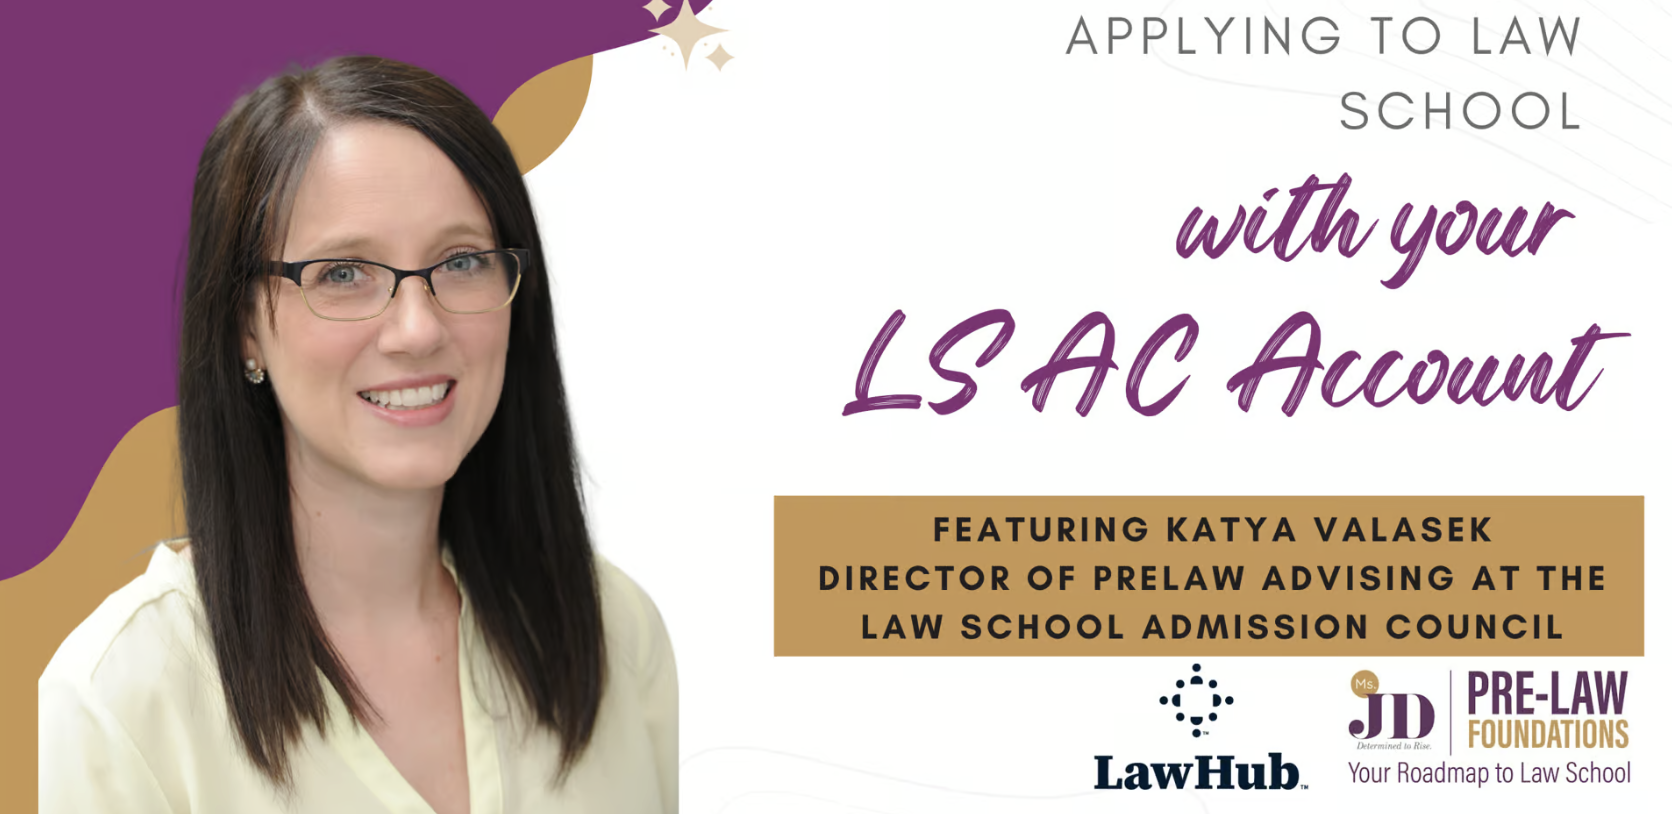 A title page of a webinar titled "Applying to Law School with your LSAC Account," showcasing an image of a woman.